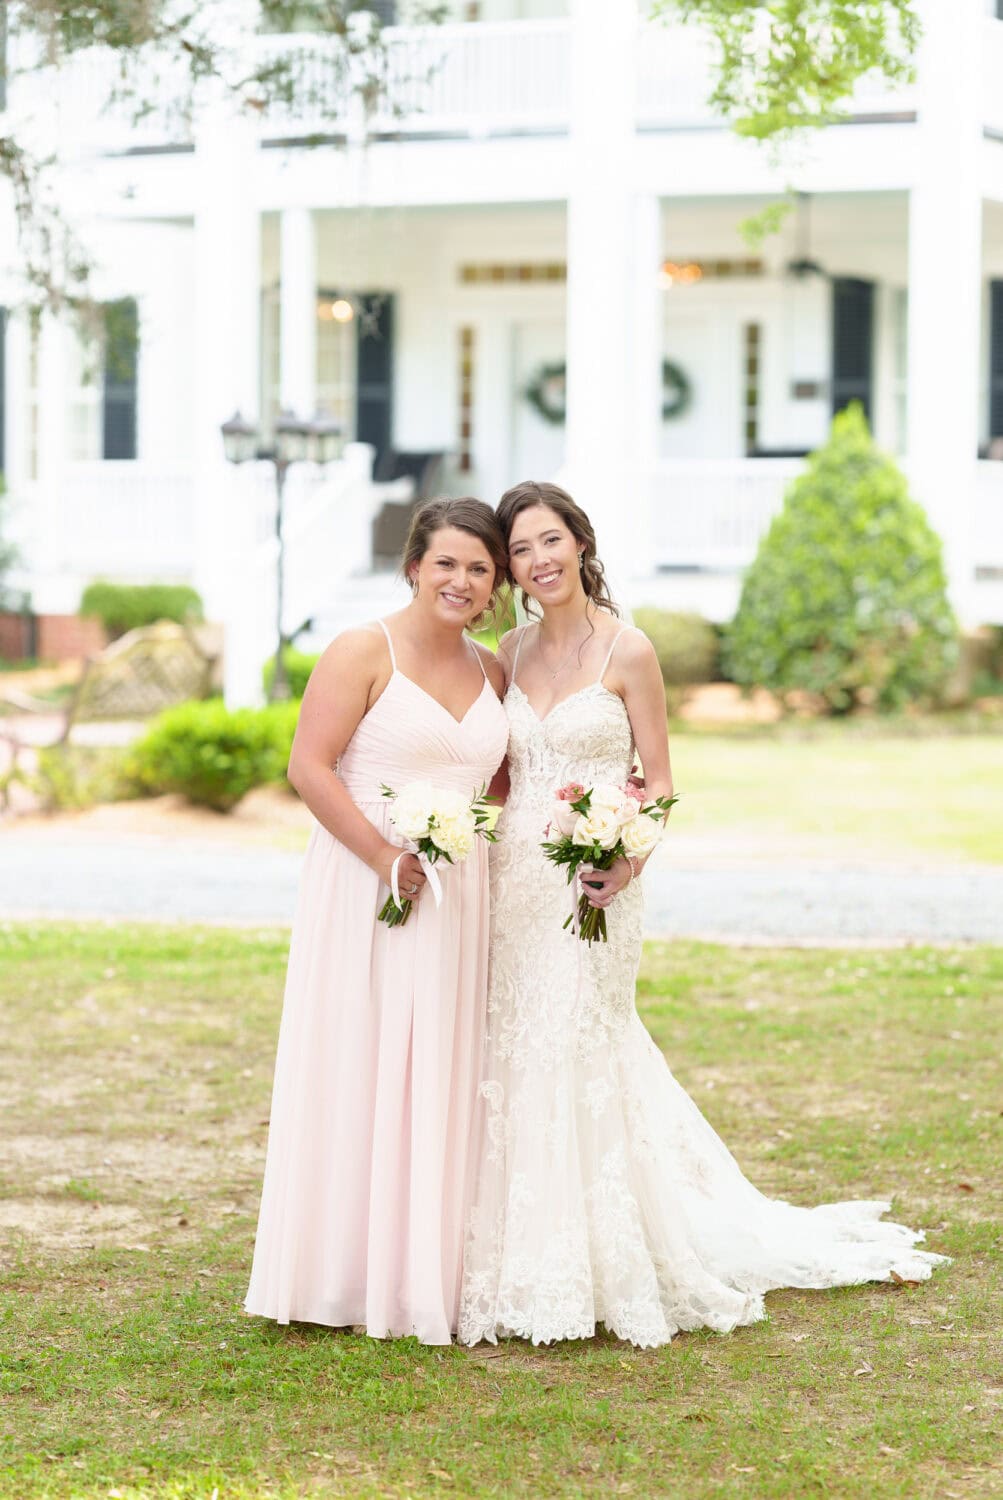 Portraits of the bride and bridesmaids in front of the house - Tanglewood Plantation